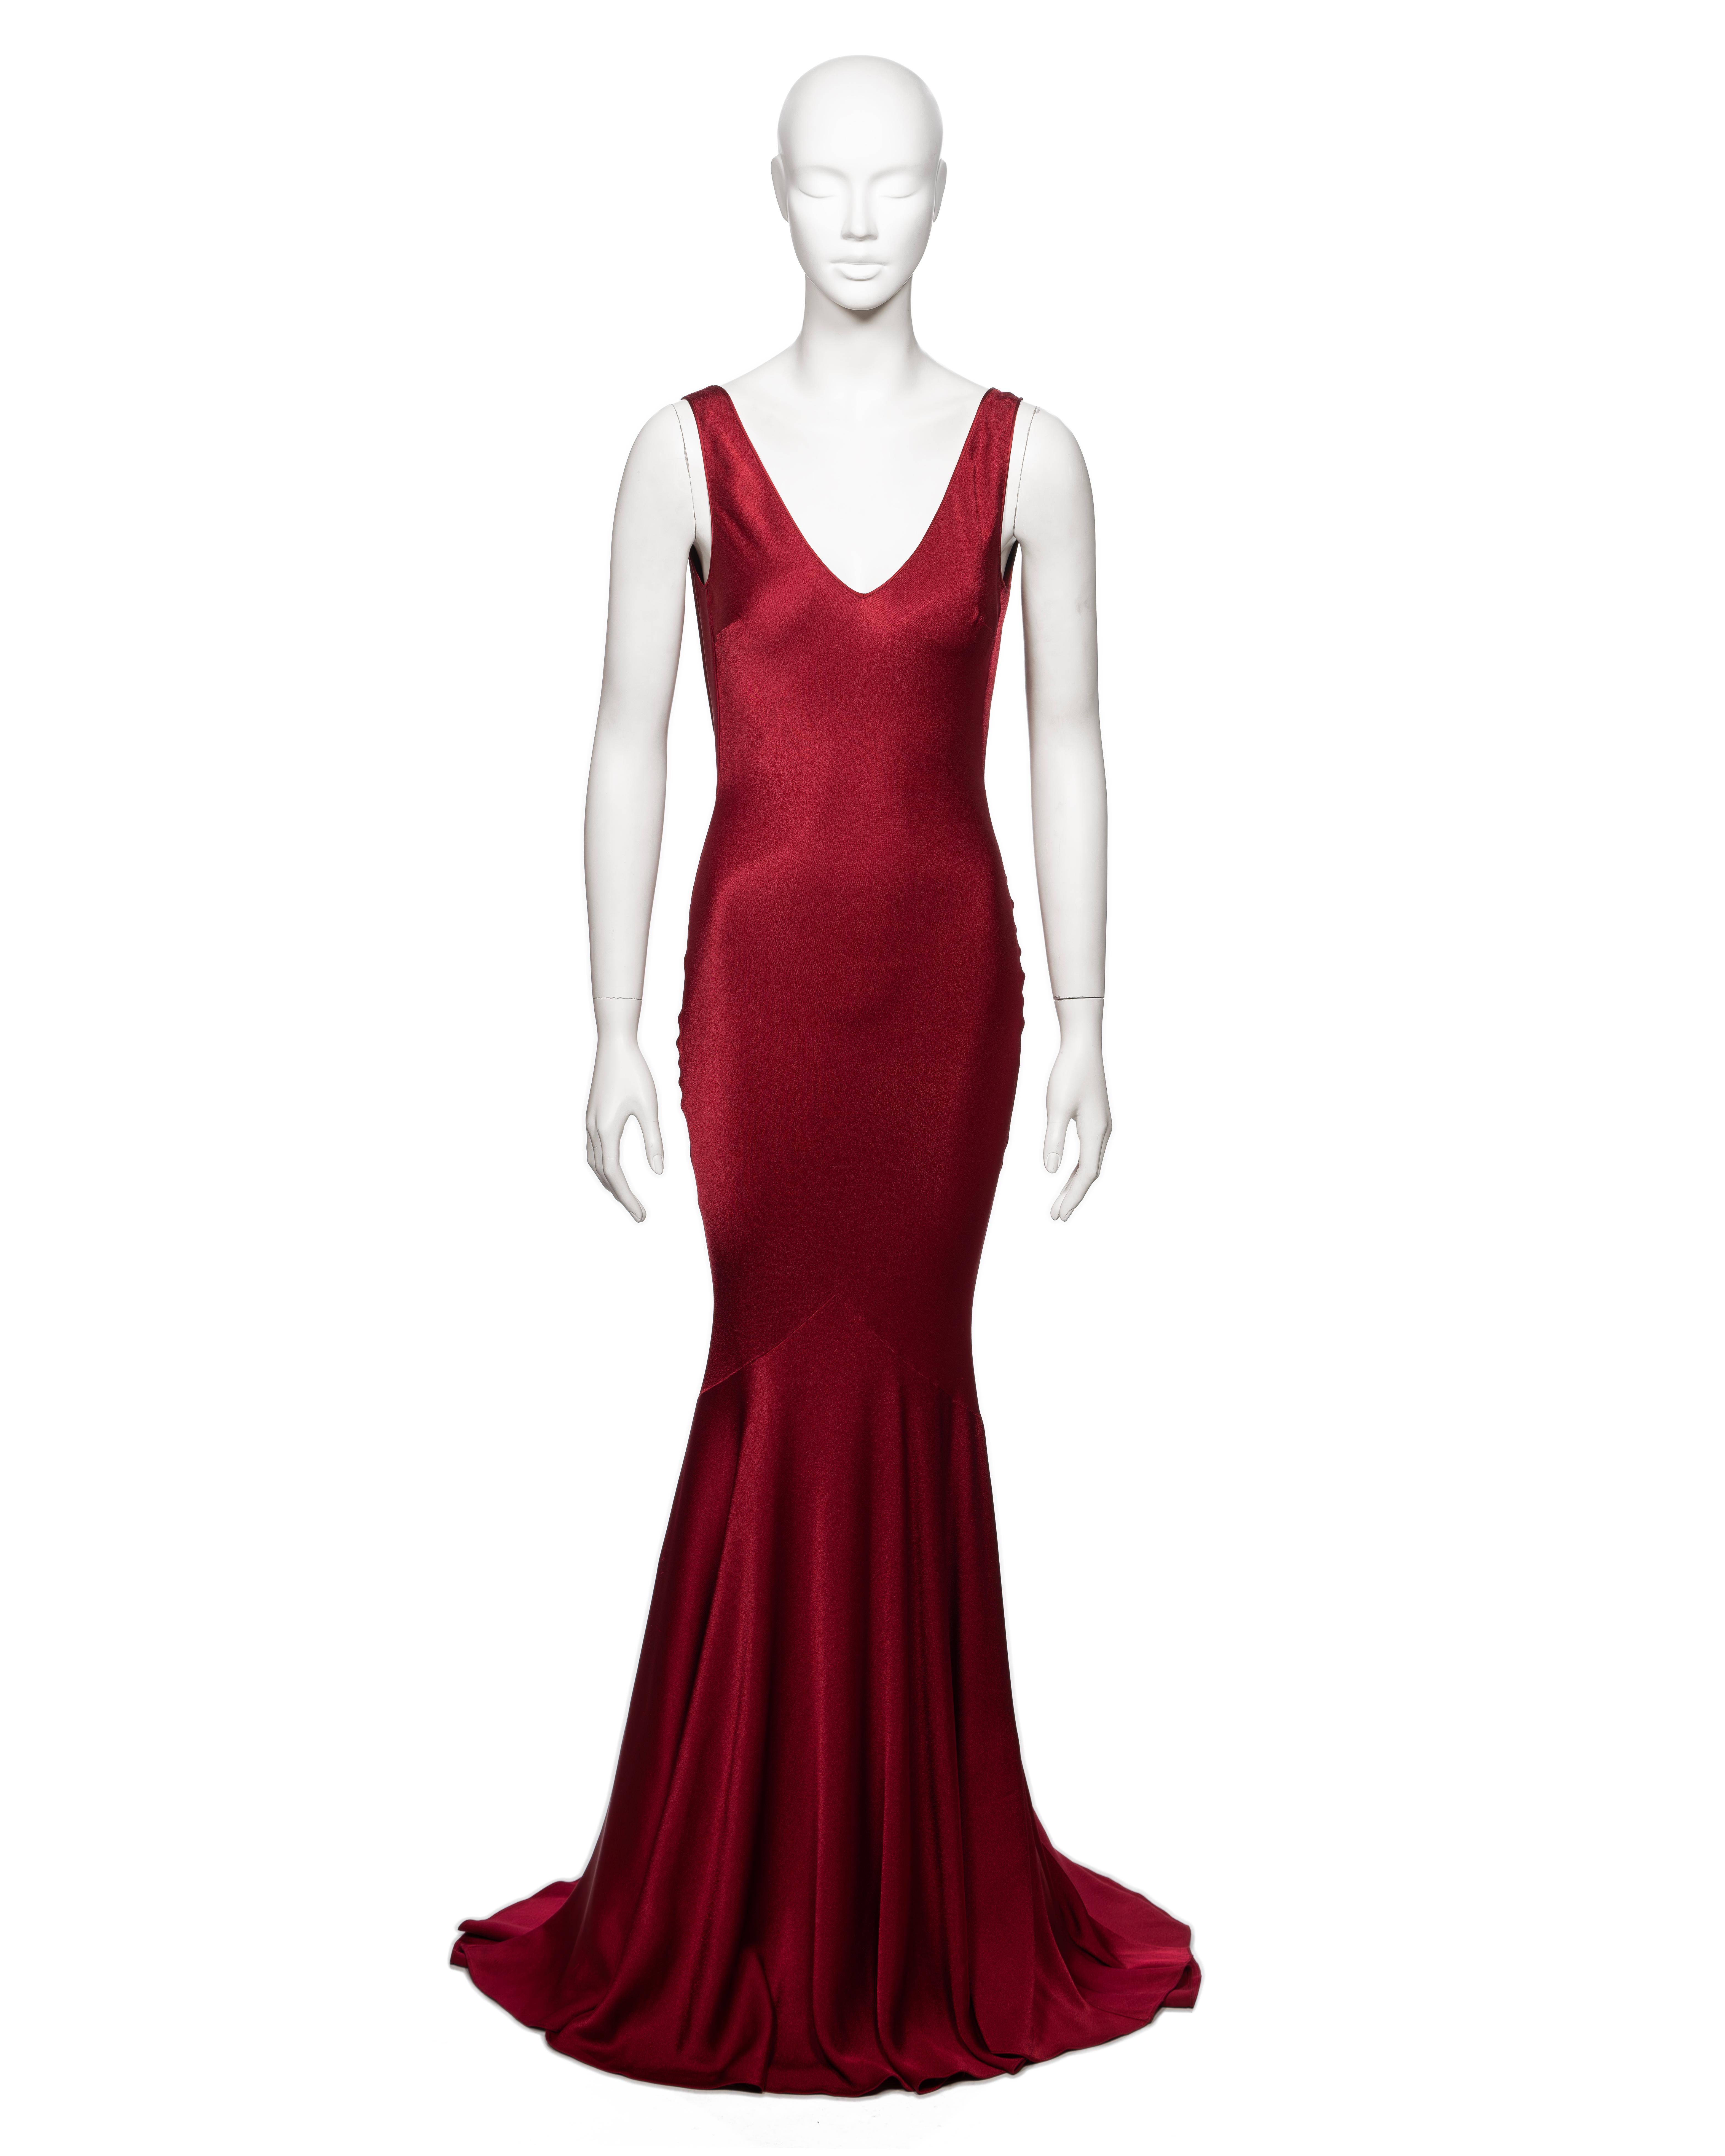 ▪ Brand: John Galliano
▪ Creative Director: John Galliano
▪ Collection: Fall-Winter 2001
▪ Sold by: One of a Kind Archive
▪ Fabric: Red crêpe-backed satin, 68% Acetate, 32% Viscose
▪ Details: V-neck, low back with cowl, floor-length flared skirt